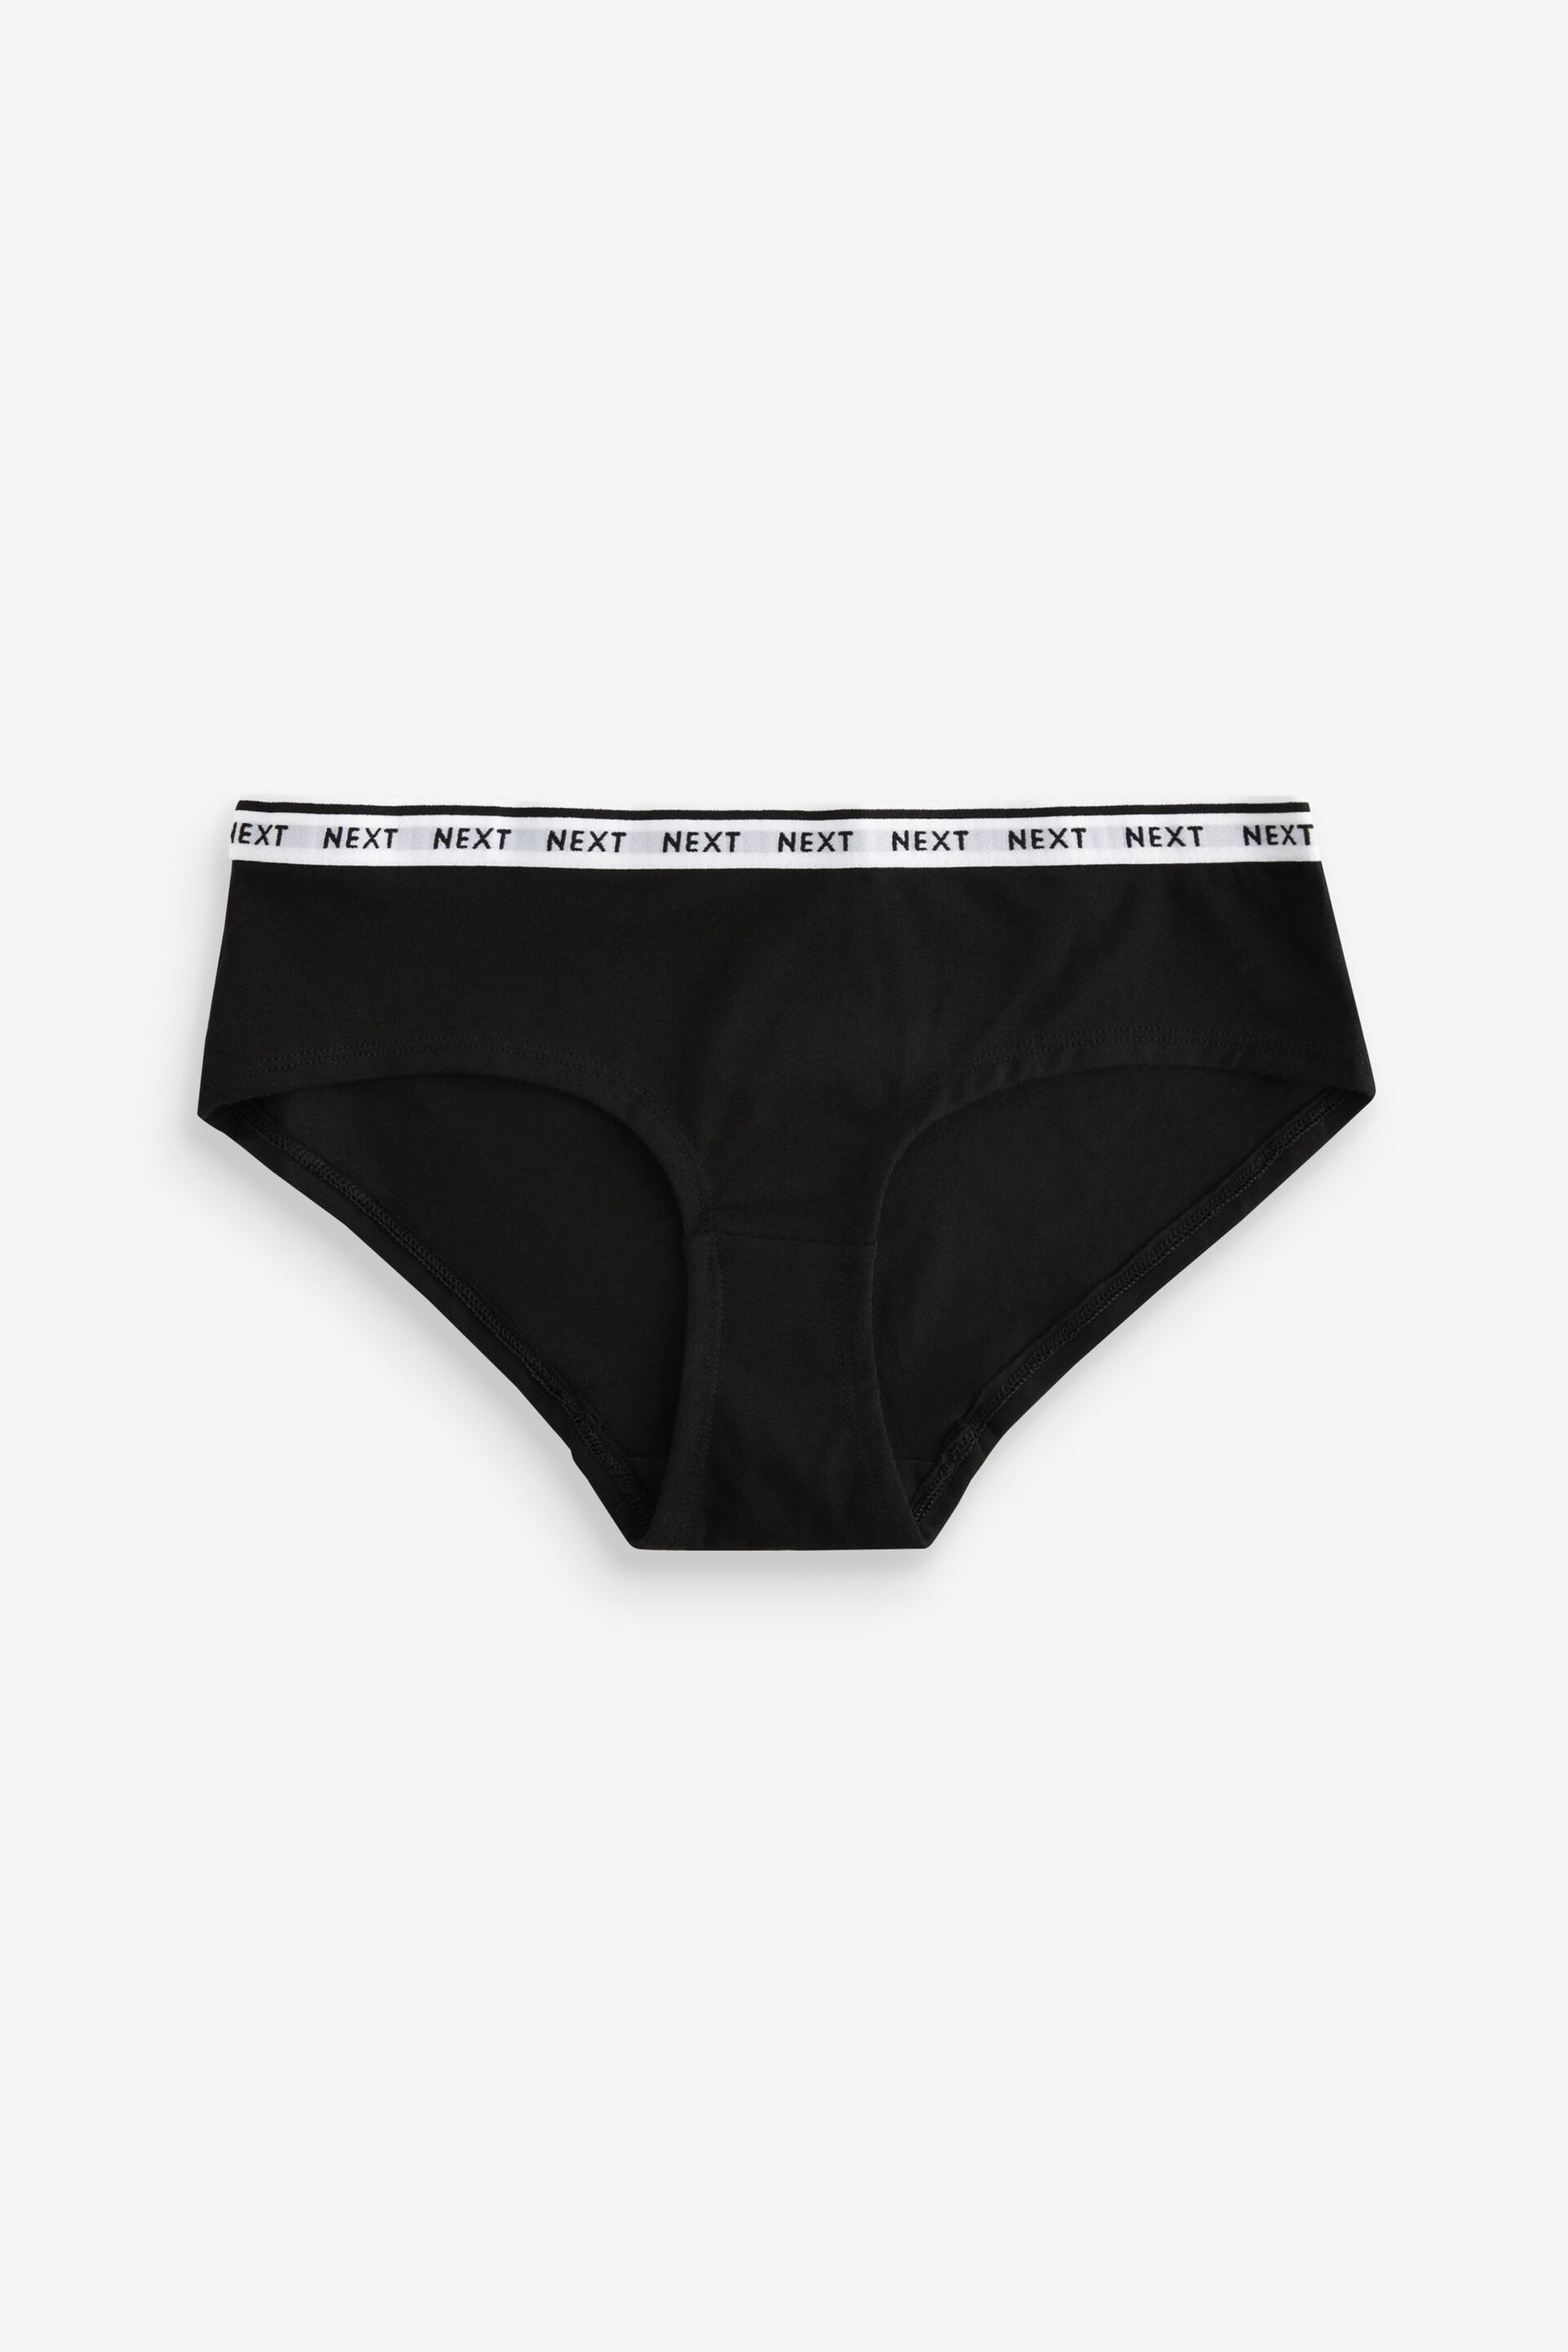 White/Black Printed Short Cotton Rich Logo Knickers 4 Pack - Image 7 of 9